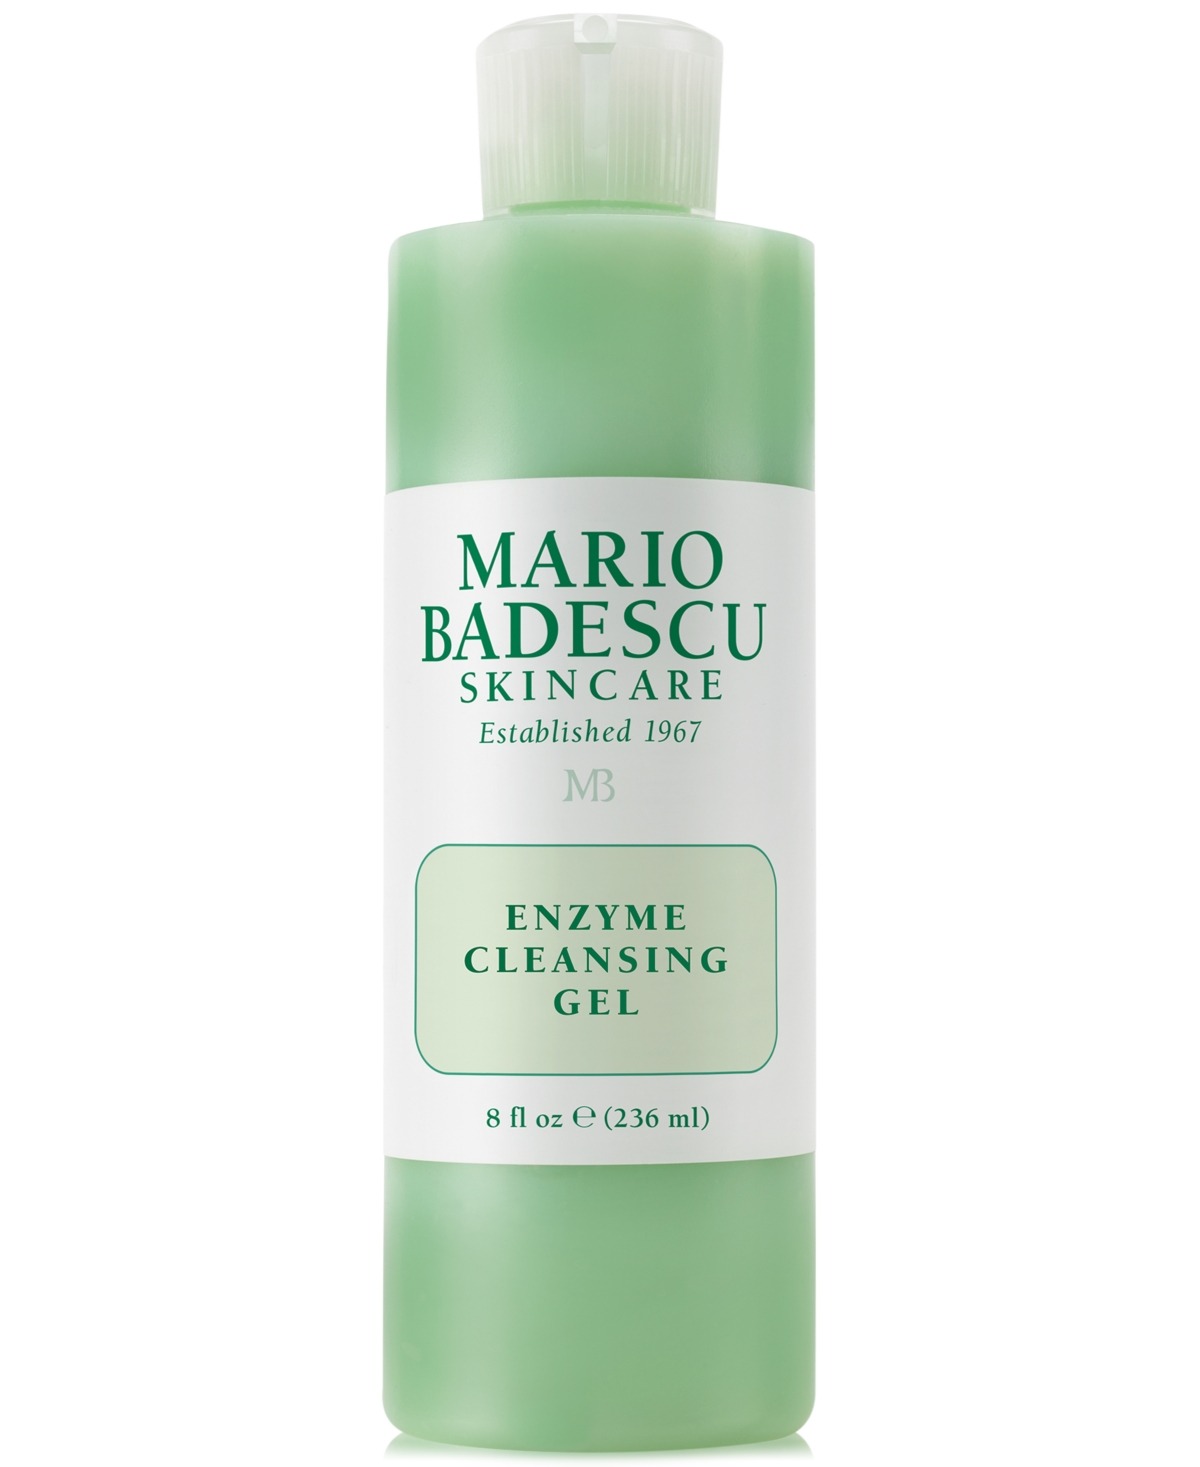 UPC 785364010079 product image for Mario Badescu Enzyme Cleansing Gel, 8-oz. | upcitemdb.com